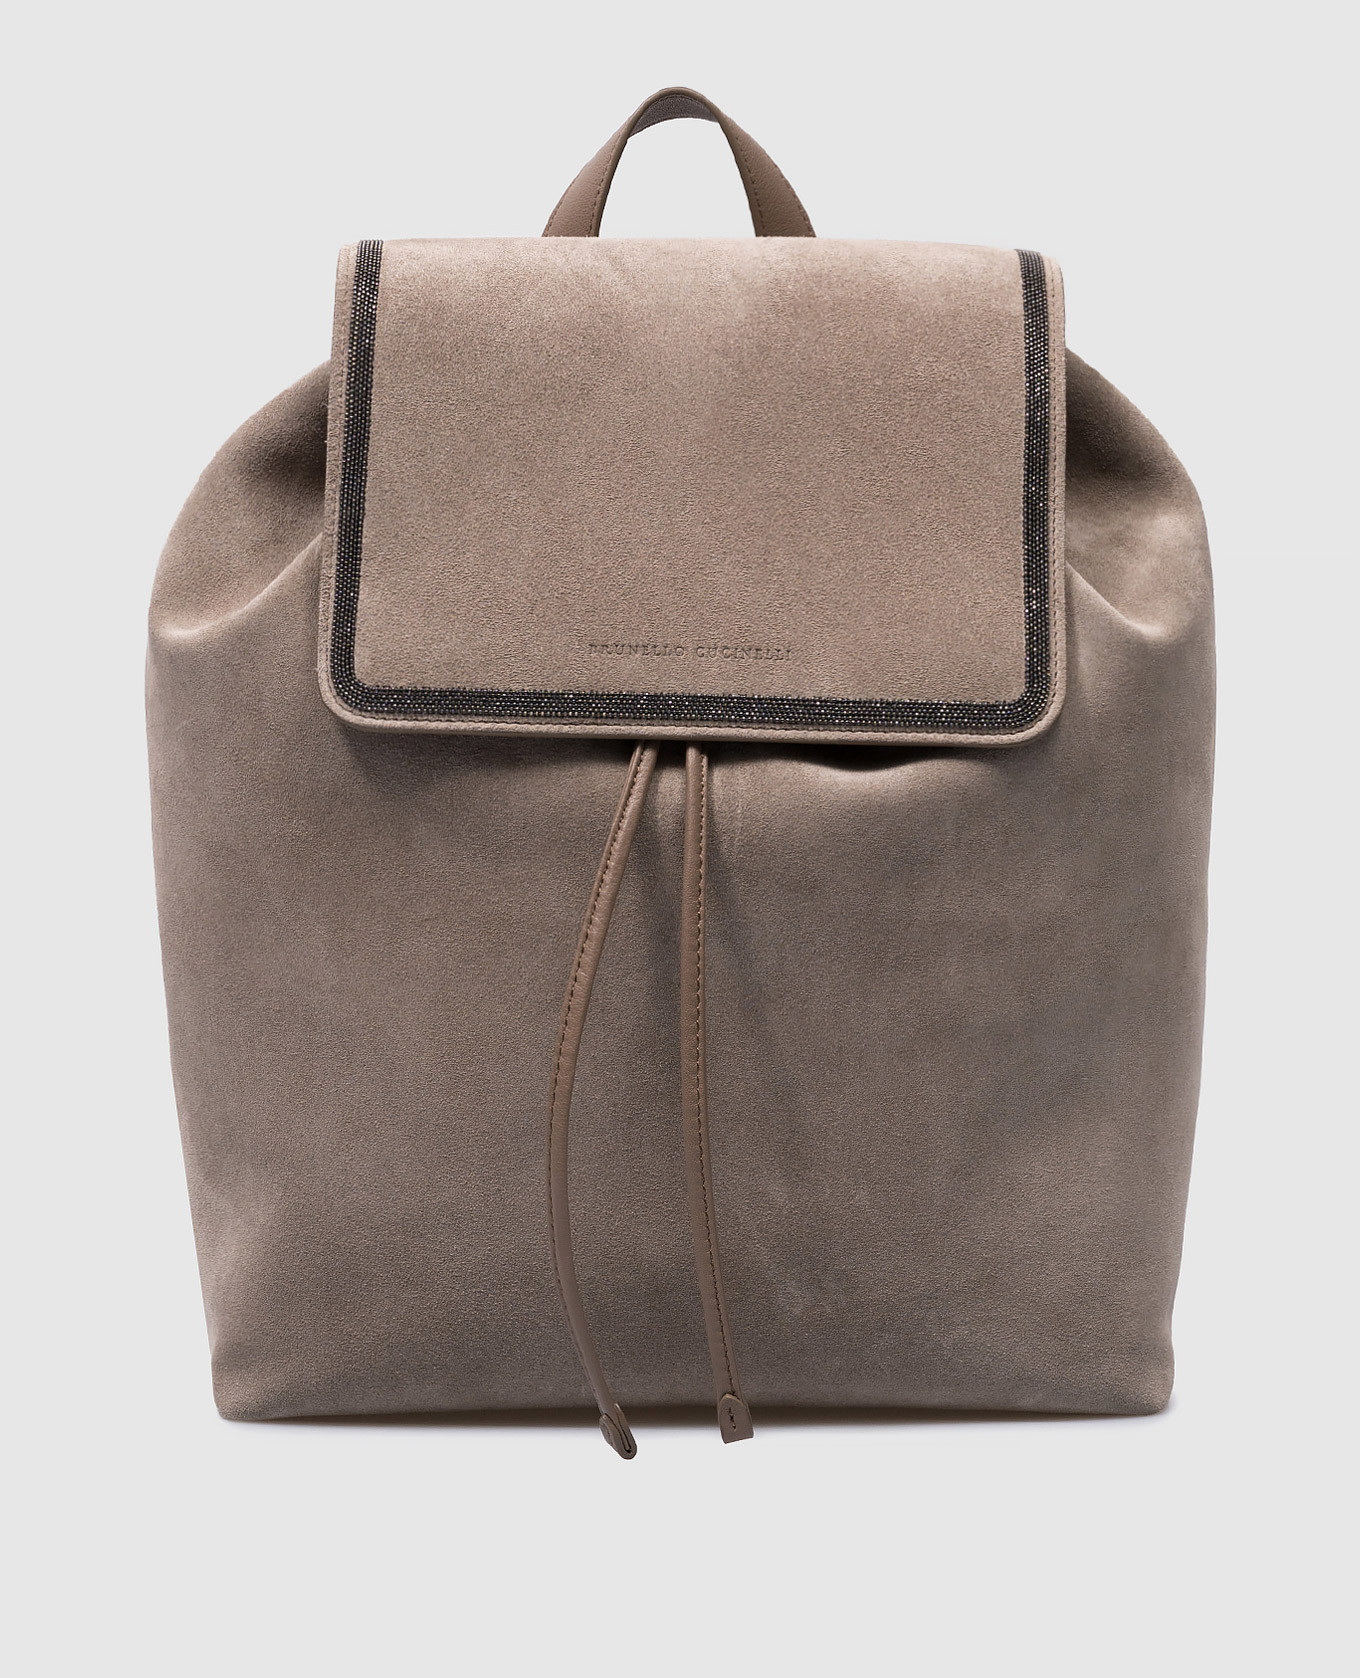 Beige leather backpack with monil chain